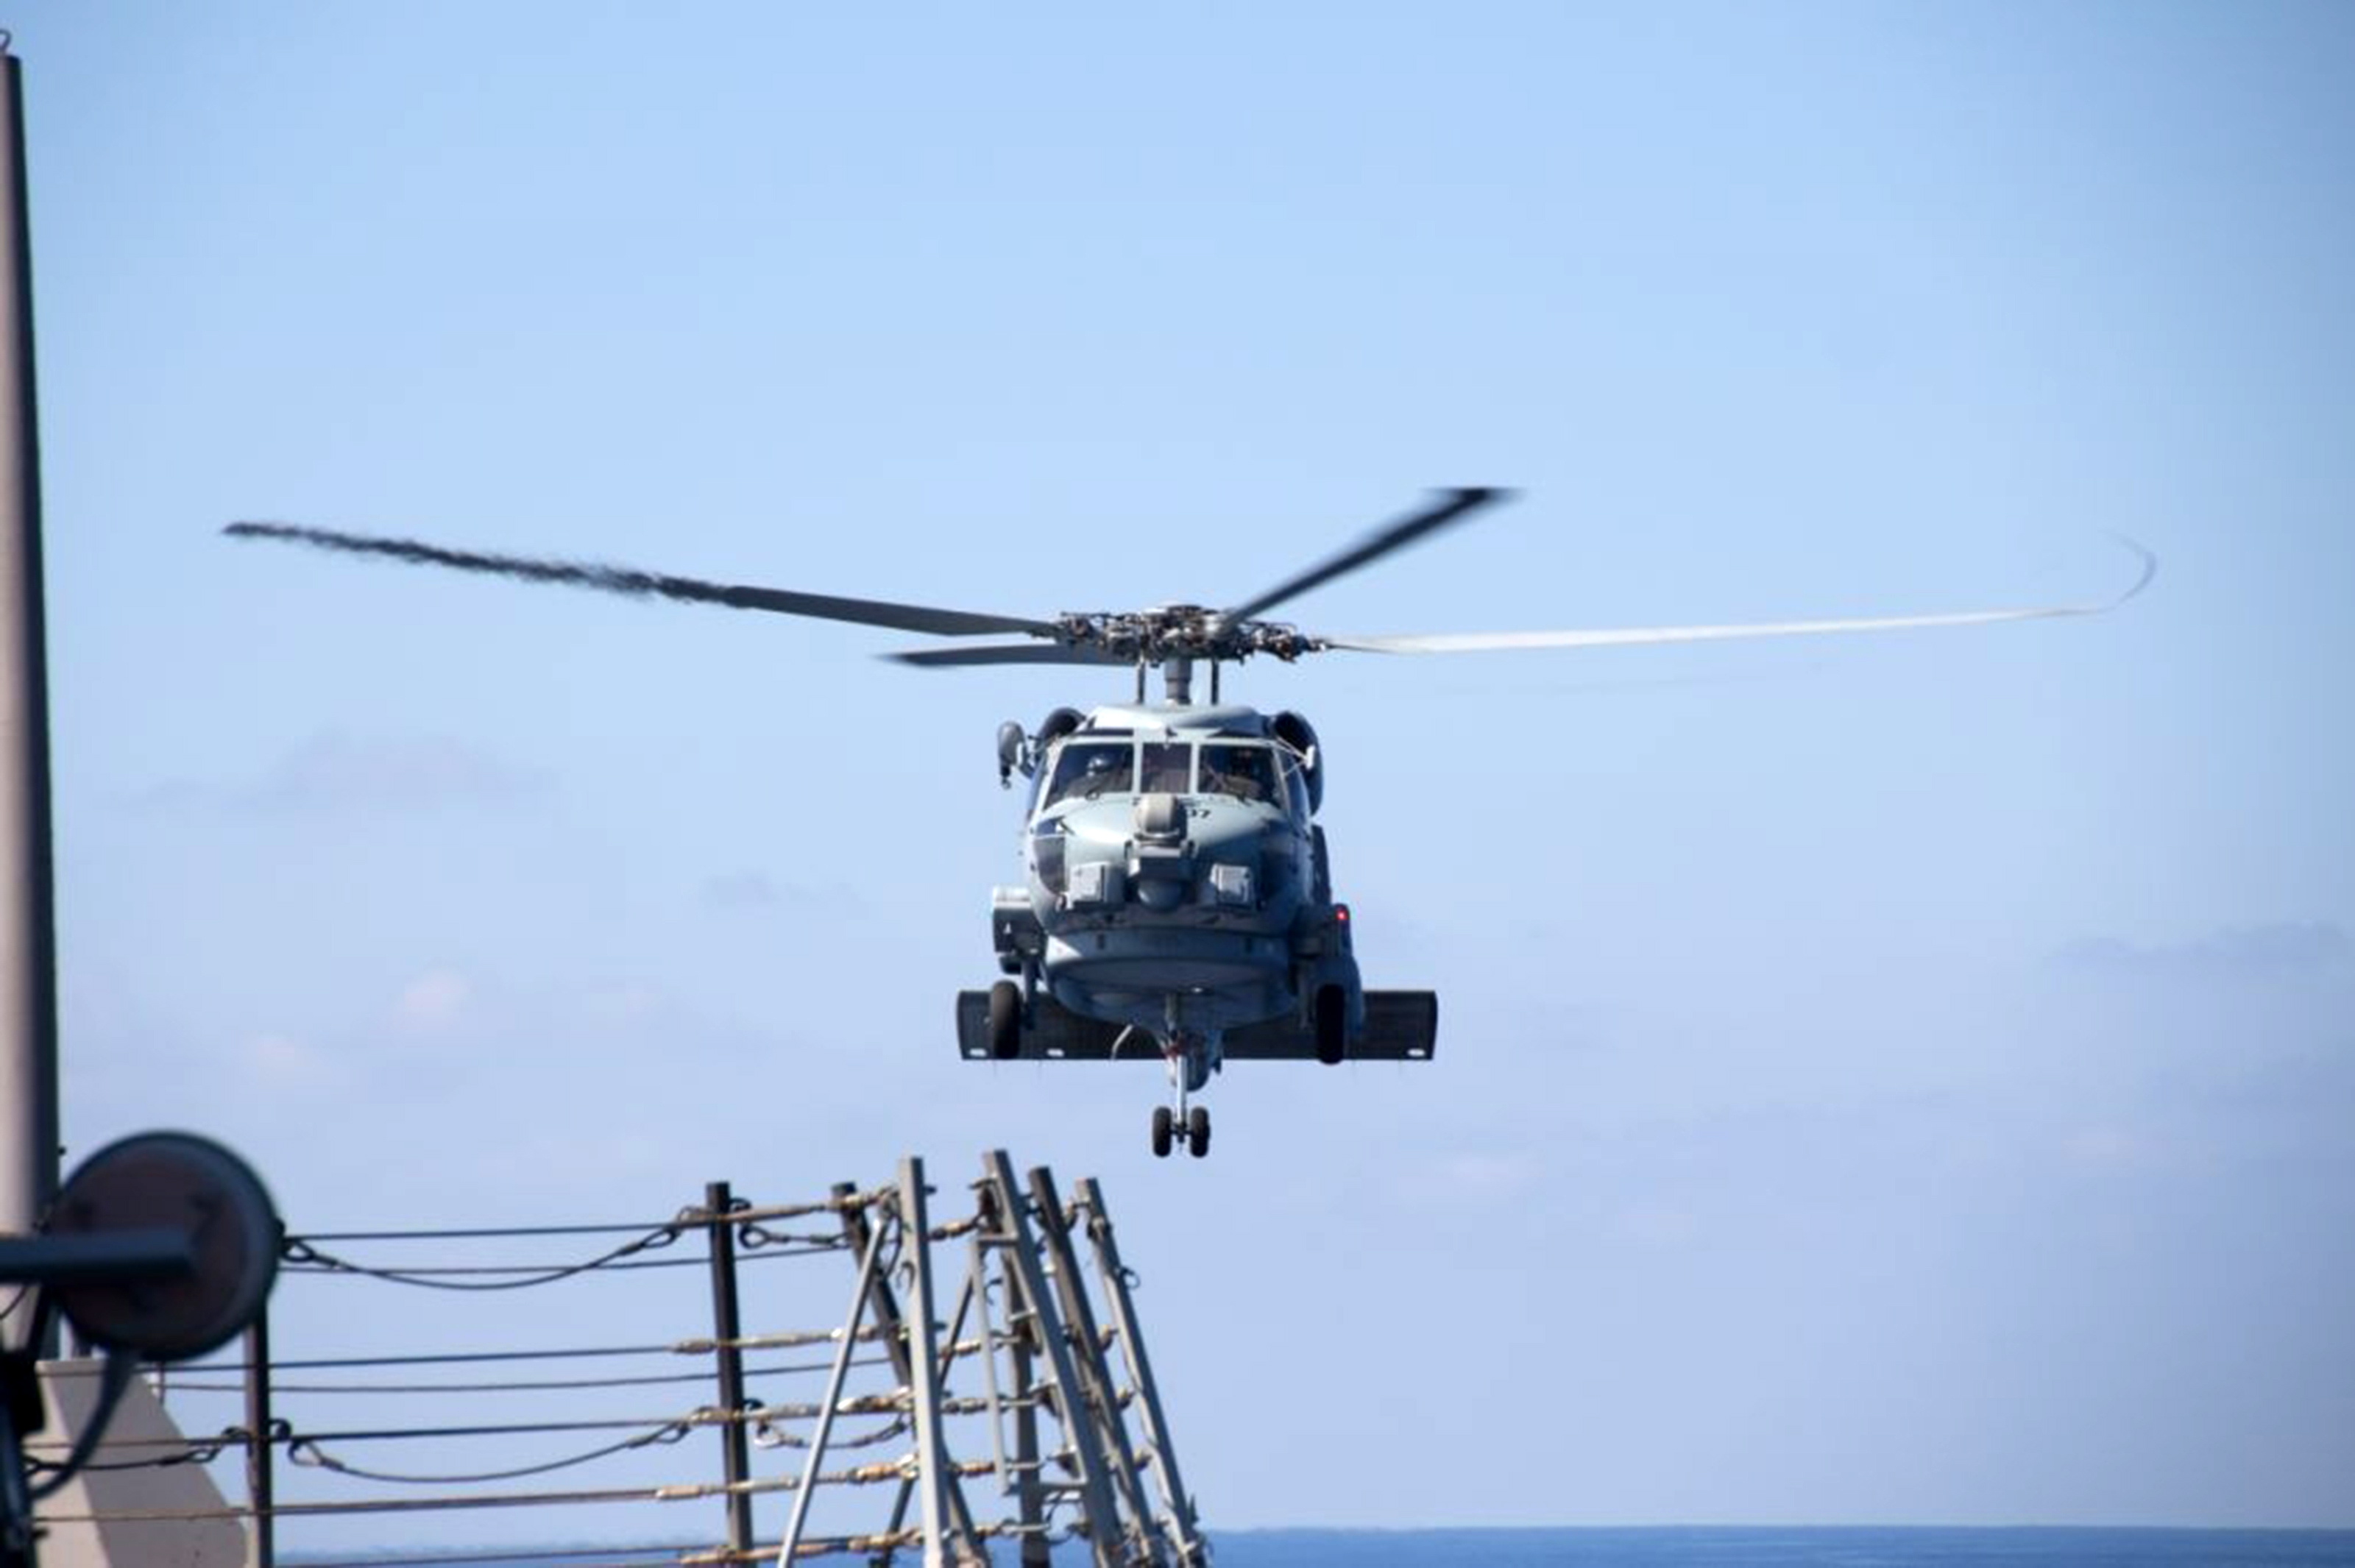 A U.S. Navy helicopter departs from the USS Pinckney to aid in the search and rescue efforts for missing Malaysian airlines flight MH370 in the Gulf of Thailand on Sunday.